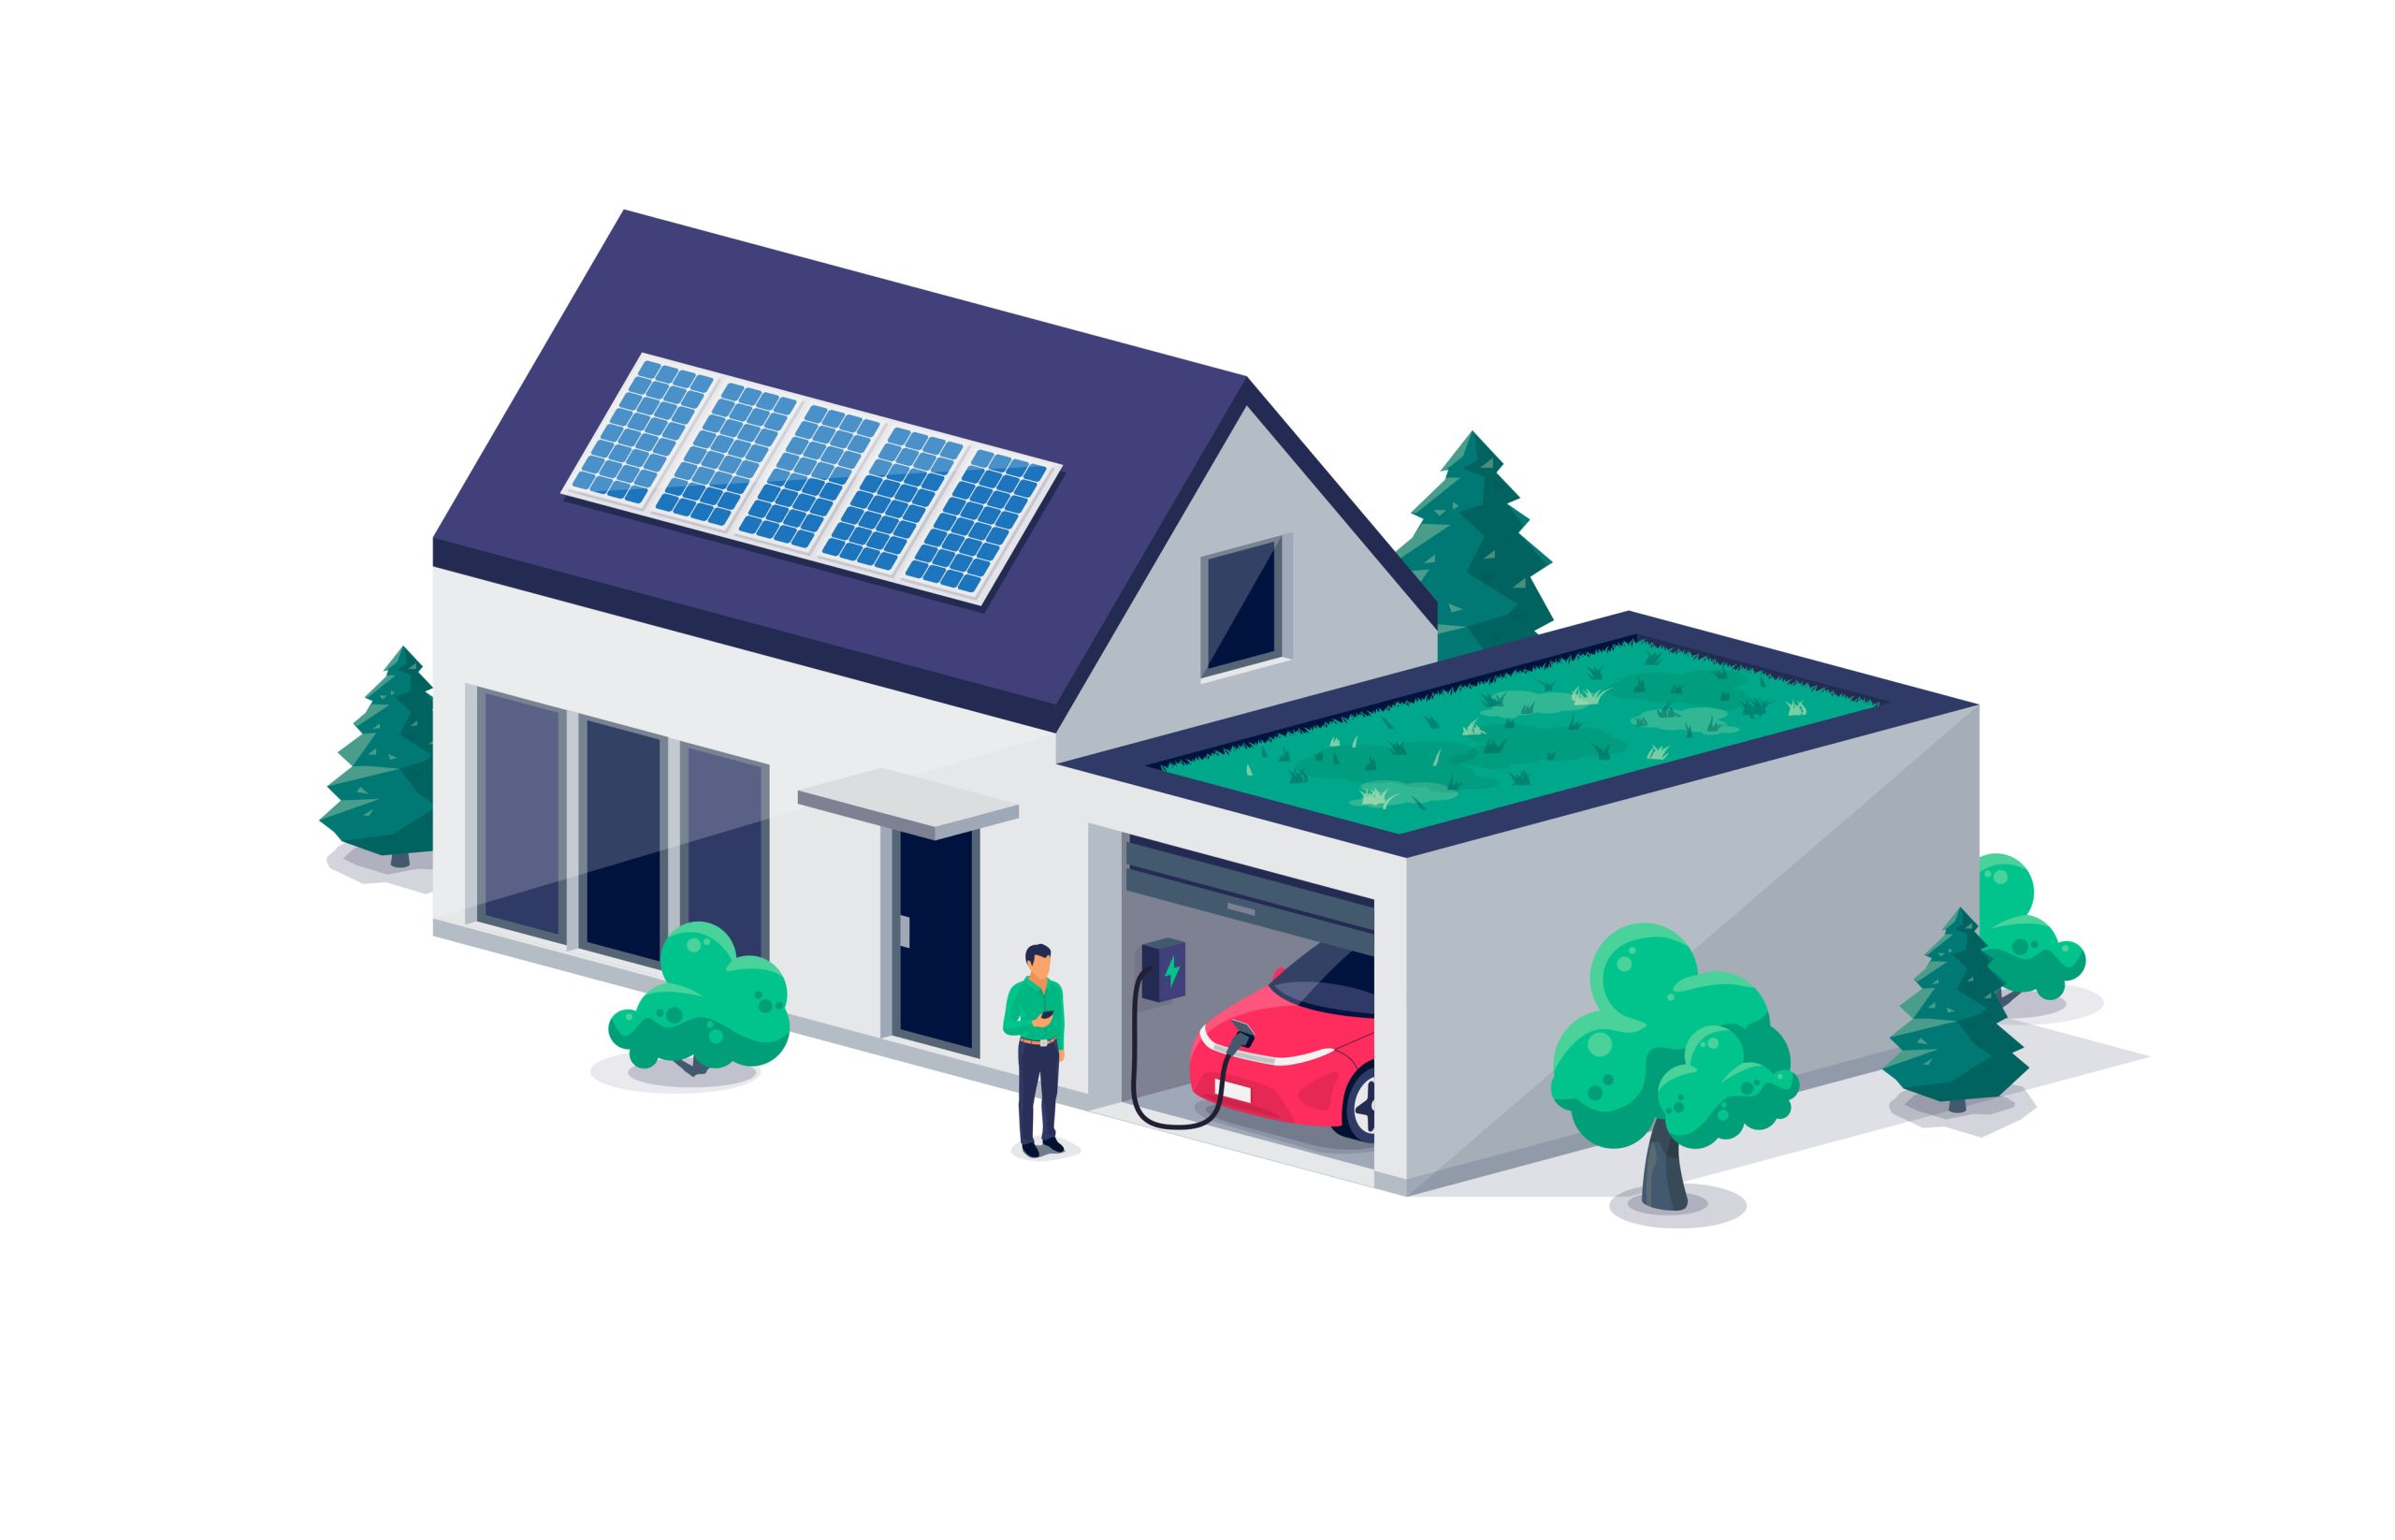 Electric car parking charging inside home garage and green roof wall box charger station. Residence family house building with clean energy photovoltaic solar panels. Renewable smart power electricity